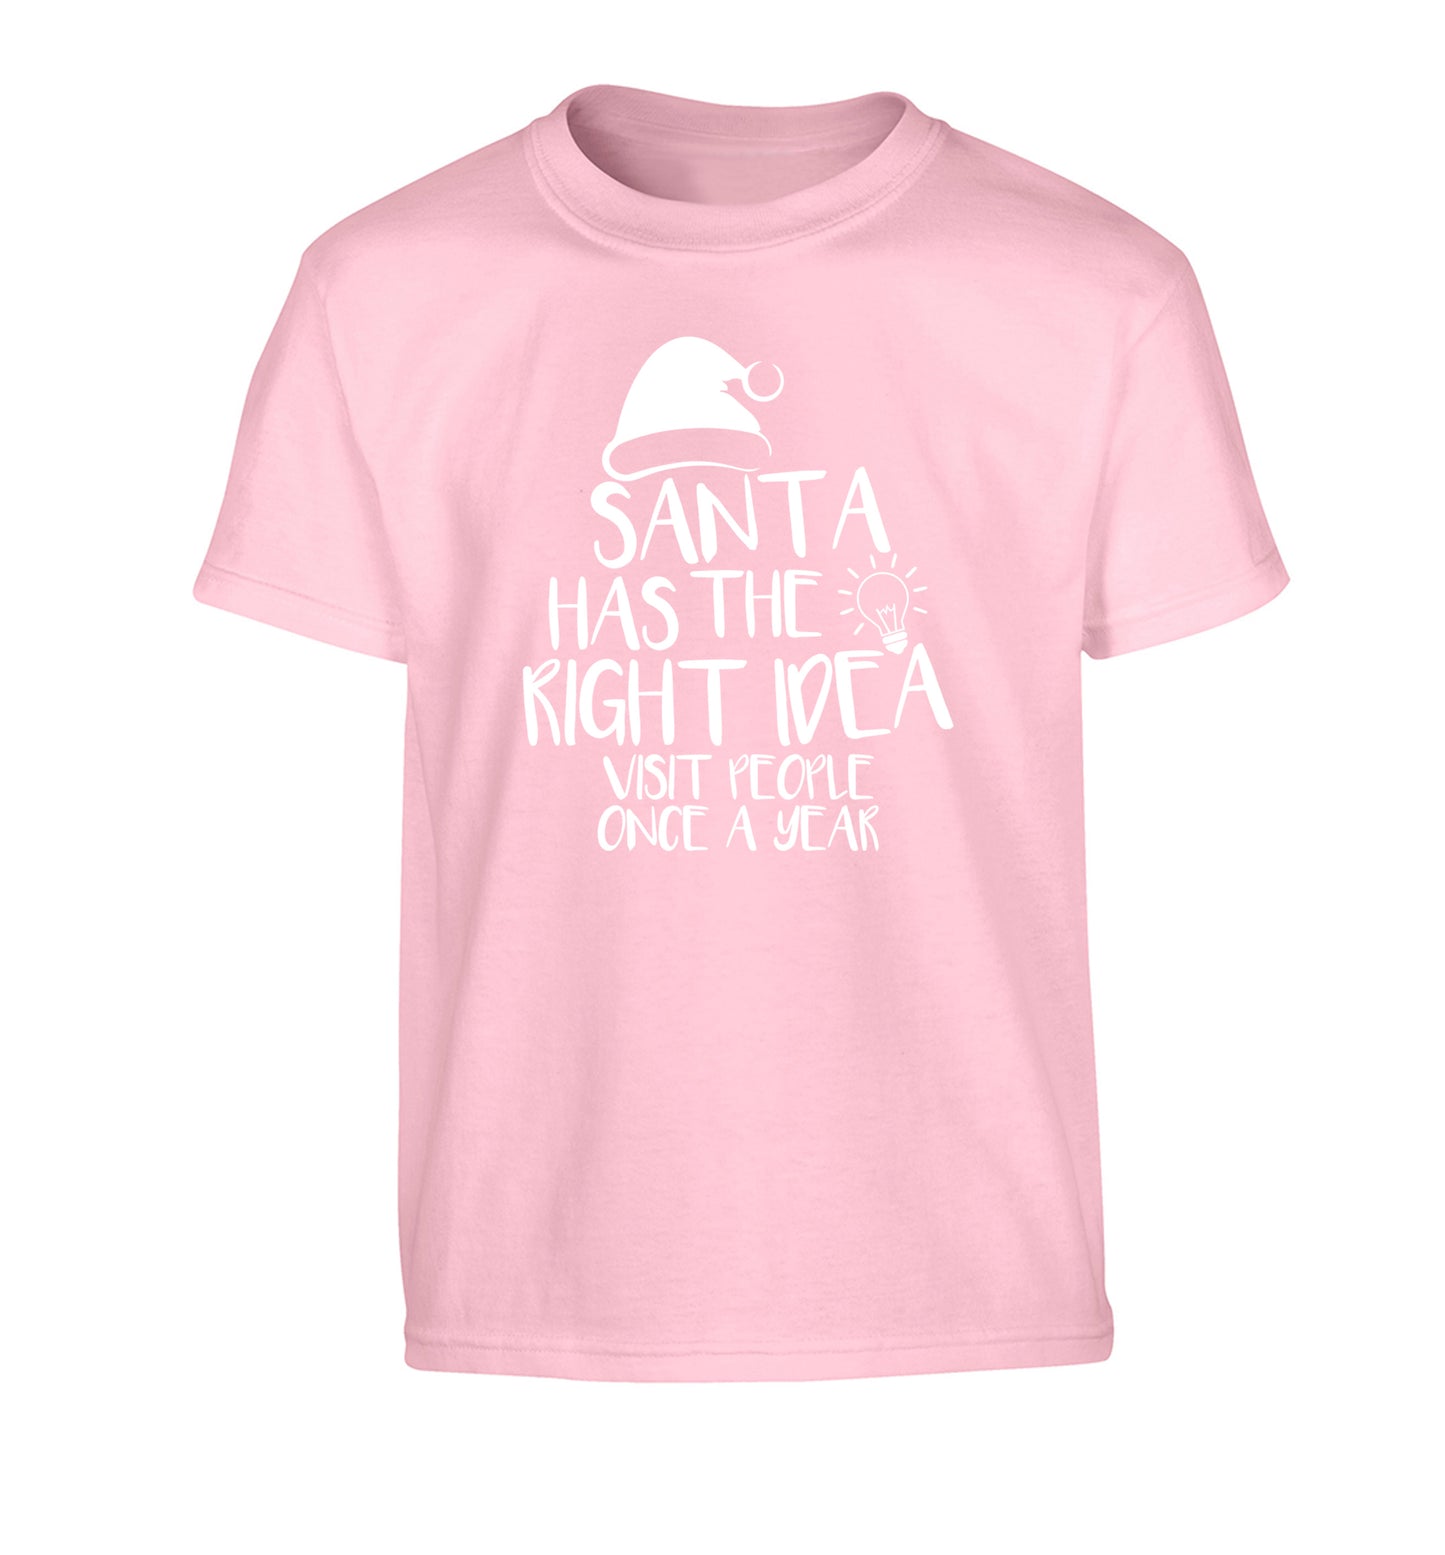 Santa has the right idea visit people once a year Children's light pink Tshirt 12-14 Years